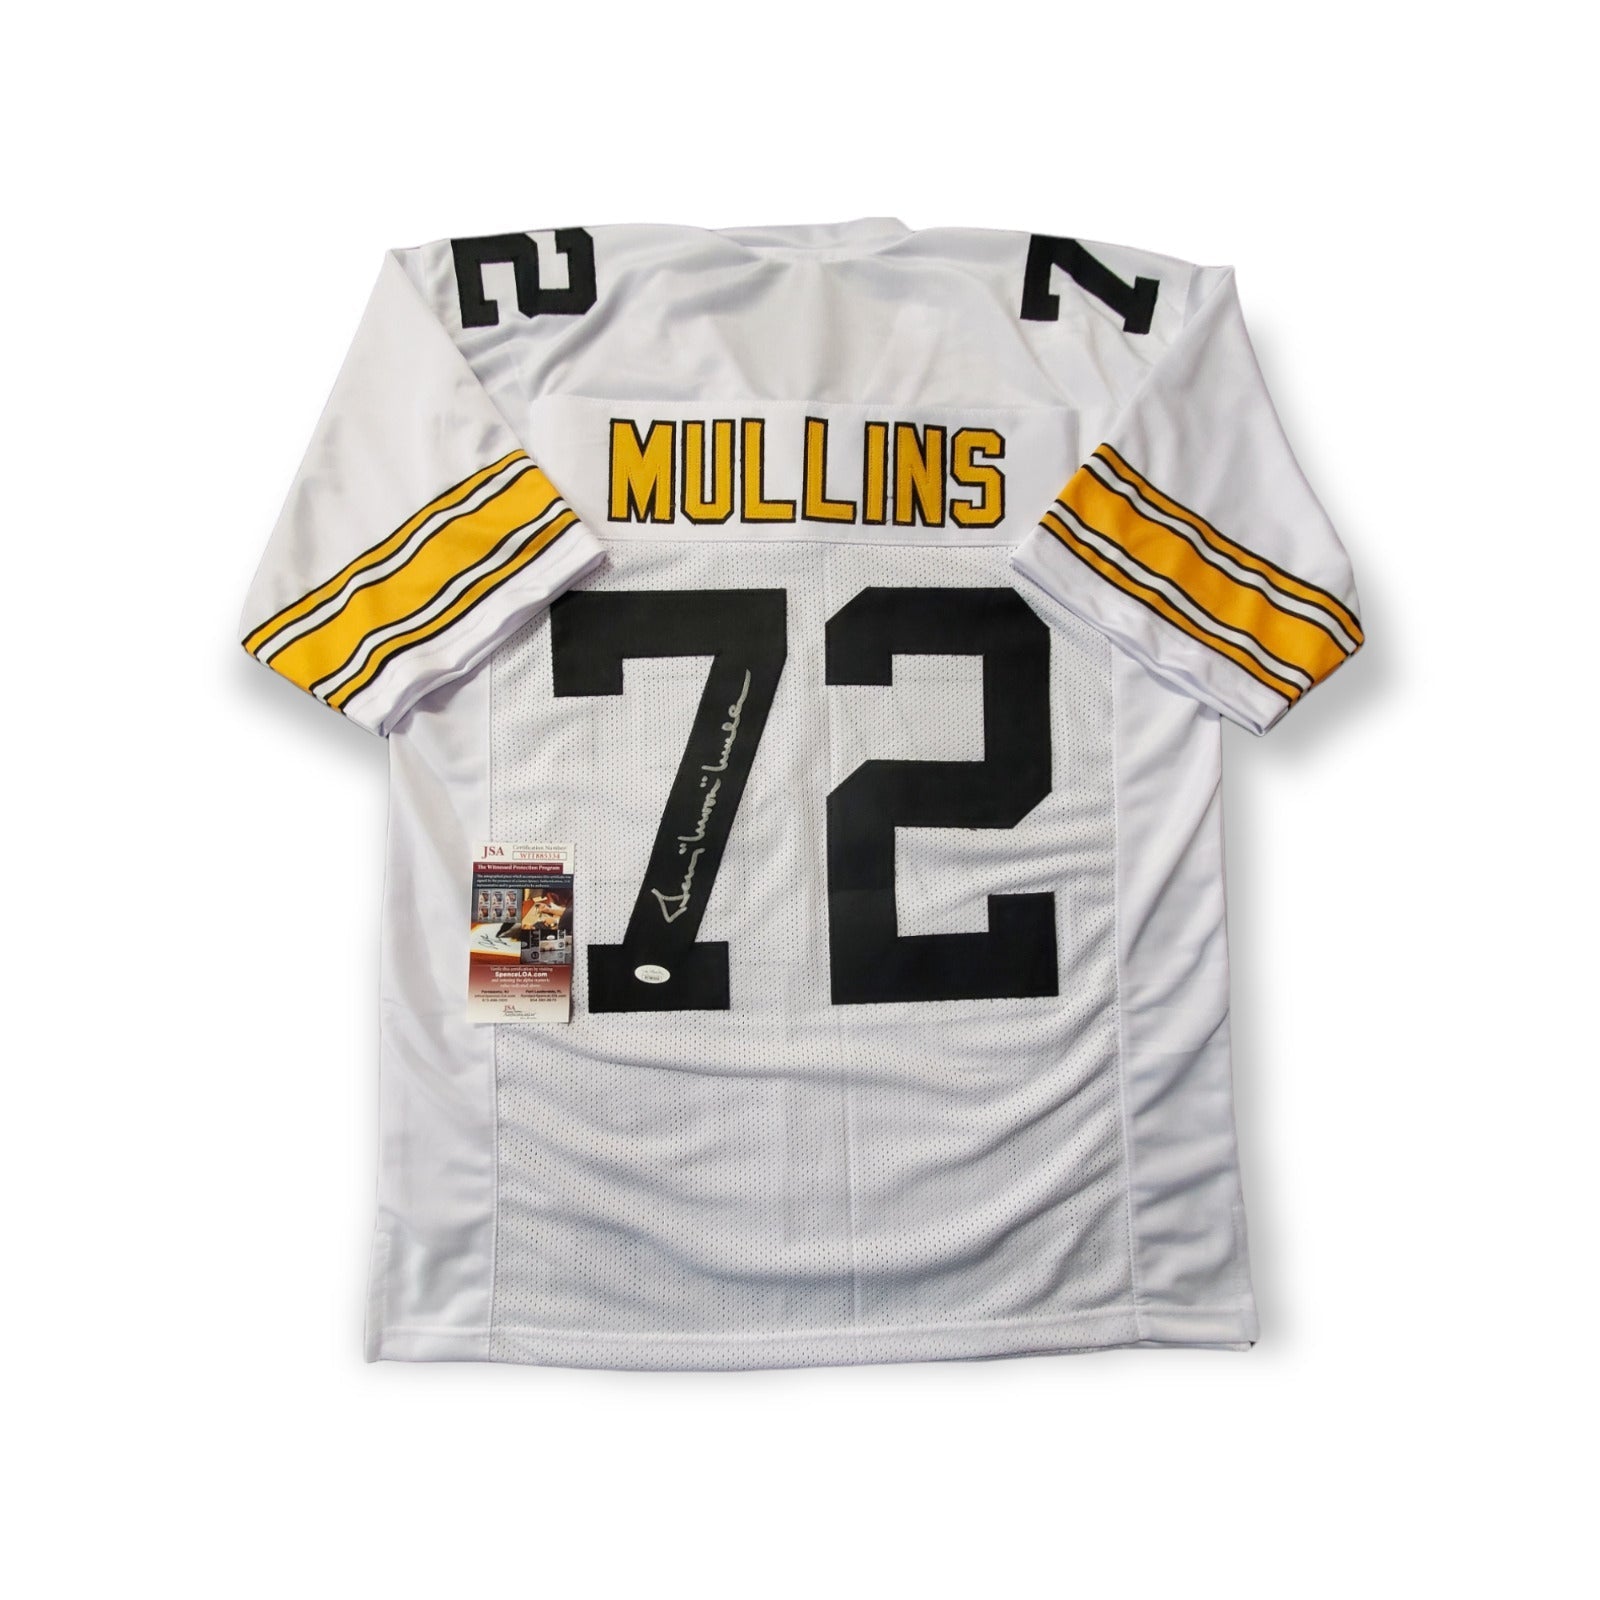 MVP Authentics Pittsburgh Steelers Gerry Mullins Autographed Signed Jersey Jsa  Coa 90 sports jersey framing , jersey framing